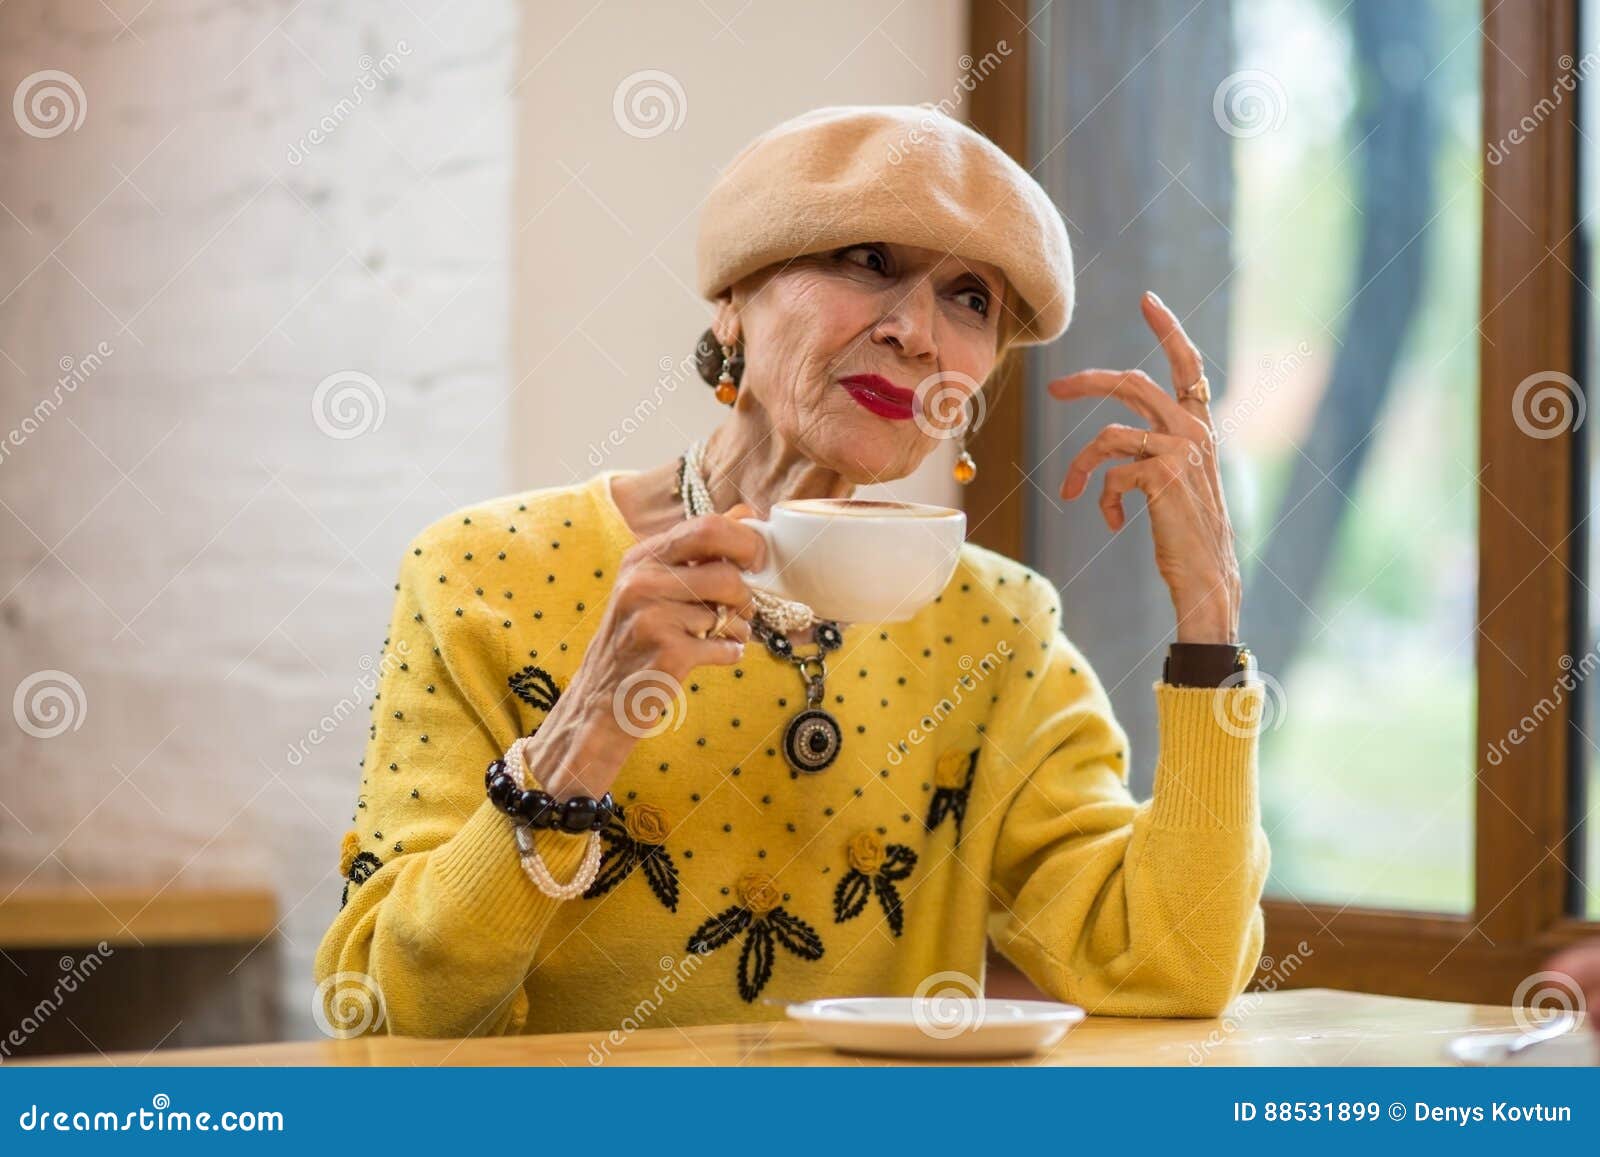 217 Old Lady Drinking Coffee Indoor Photos - Free ...